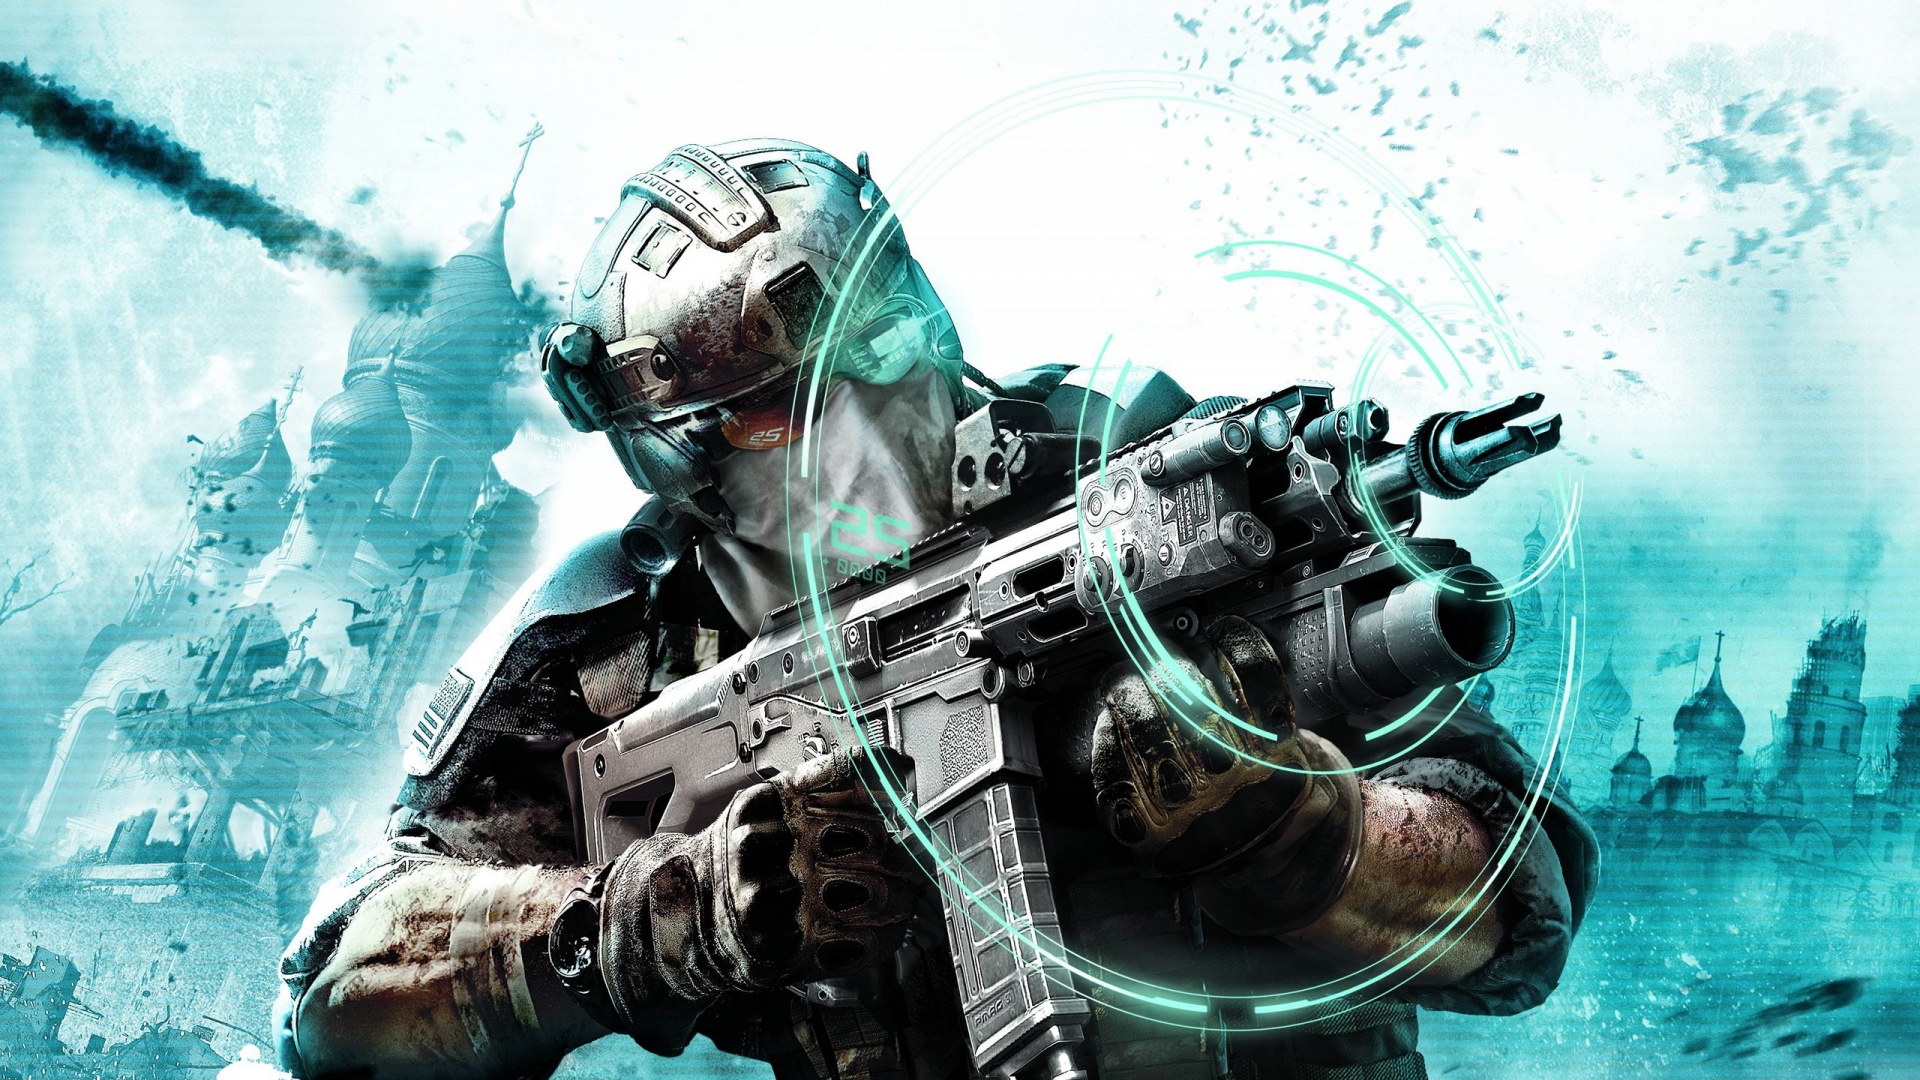 ghost recon future soldier wallpaper,action adventure game,pc game,shooter game,illustration,games